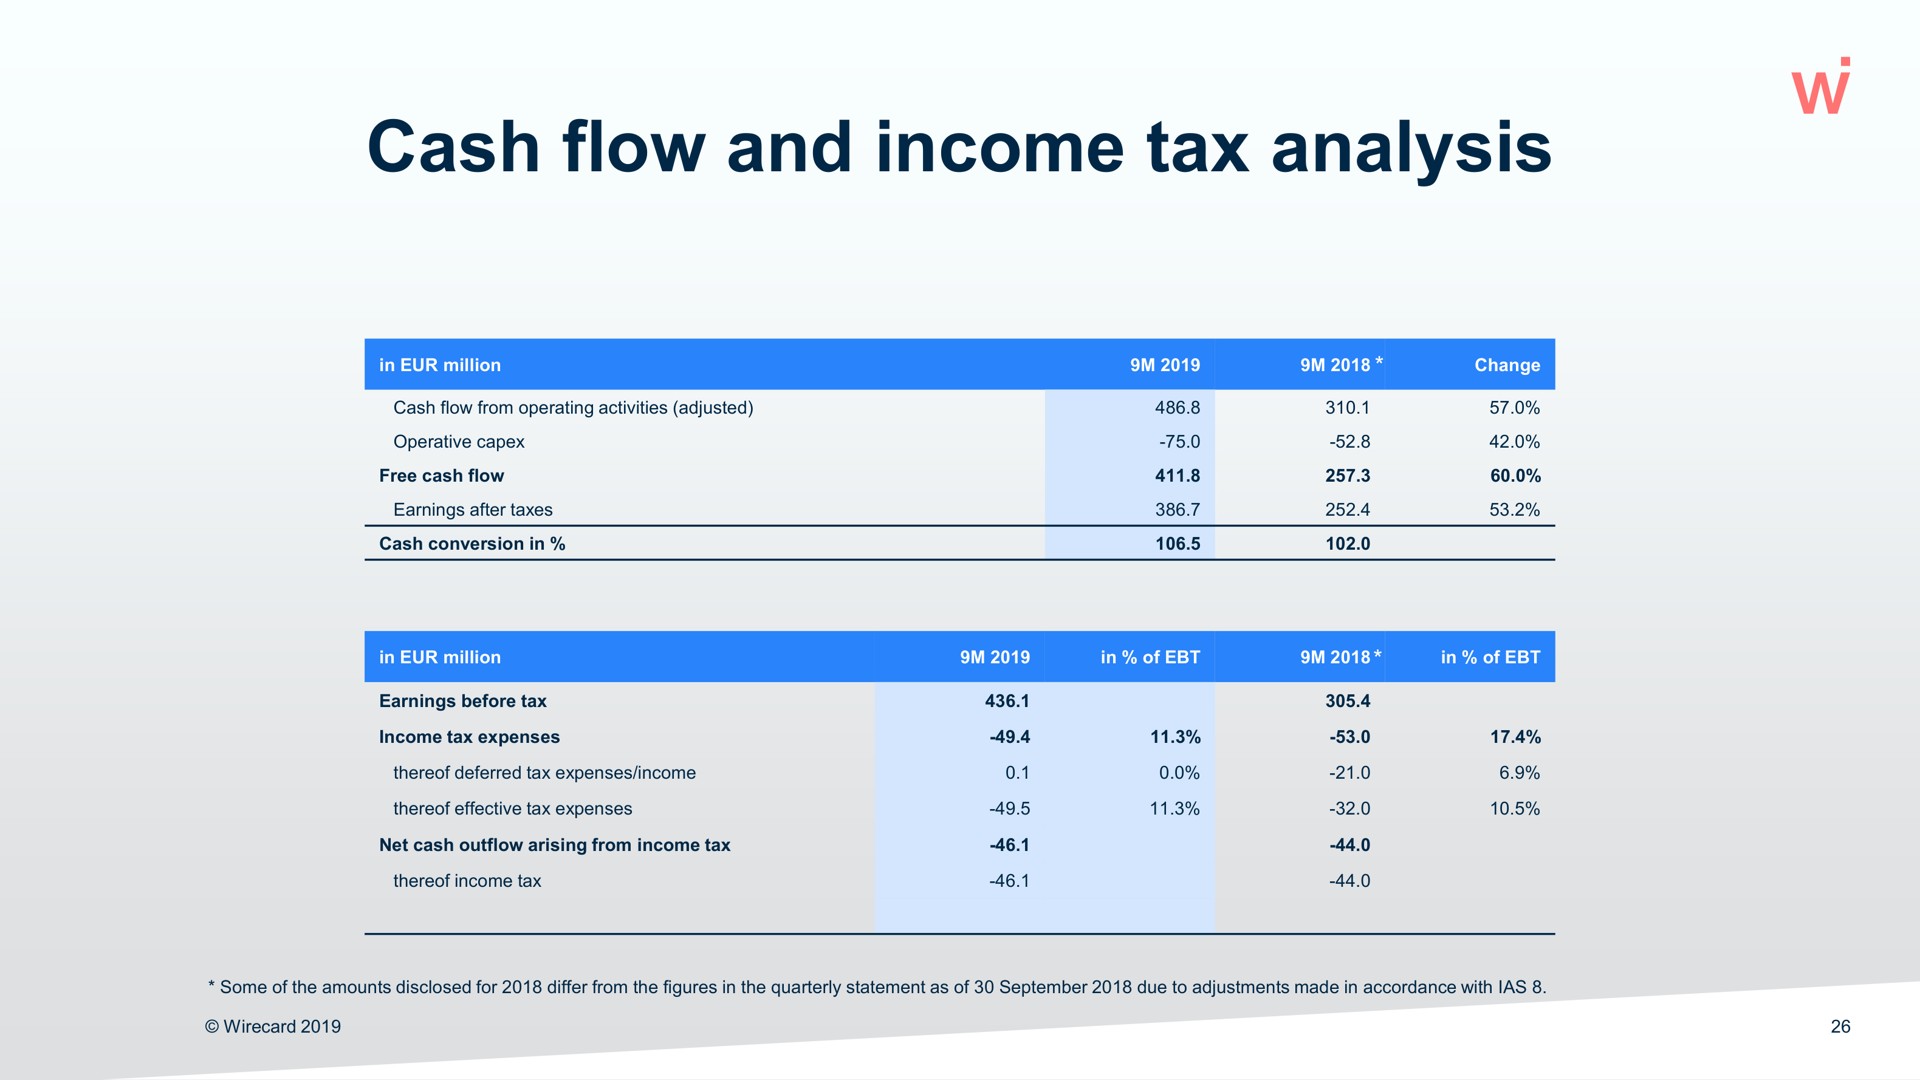 cash flow and income tax analysis | Wirecard